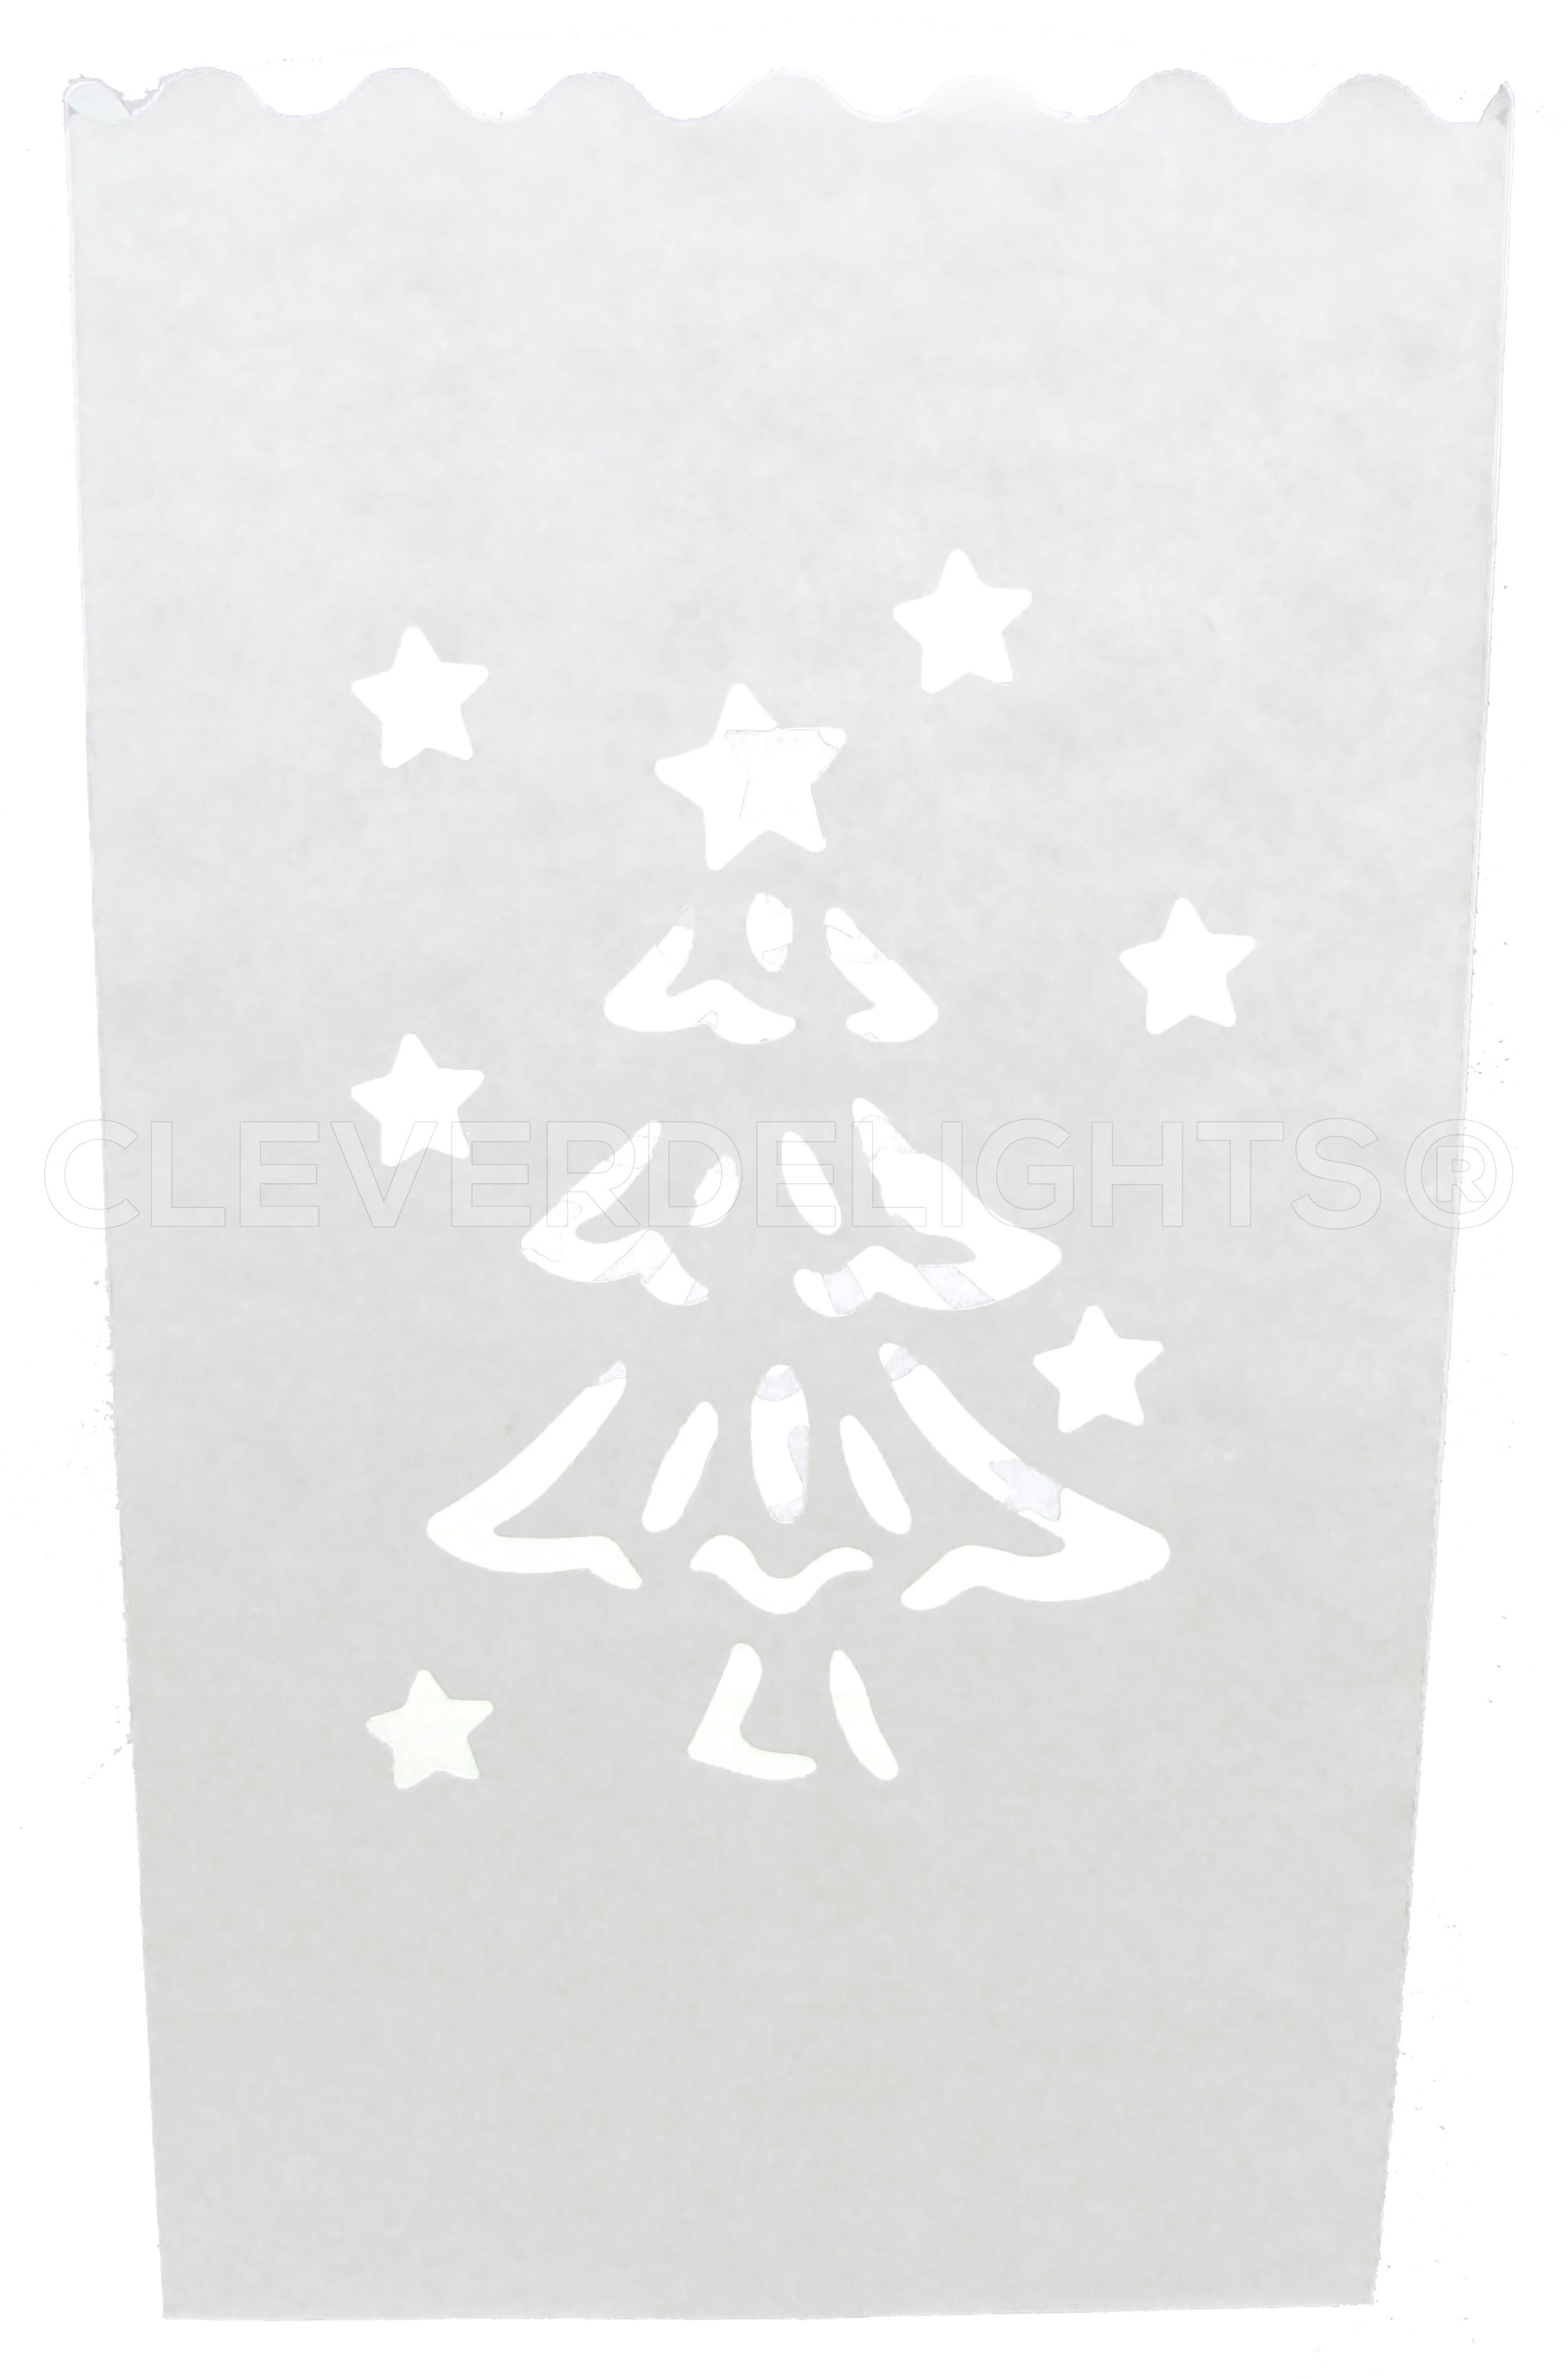 CleverDelights cleverdelights white sunburst luminary bags - 10